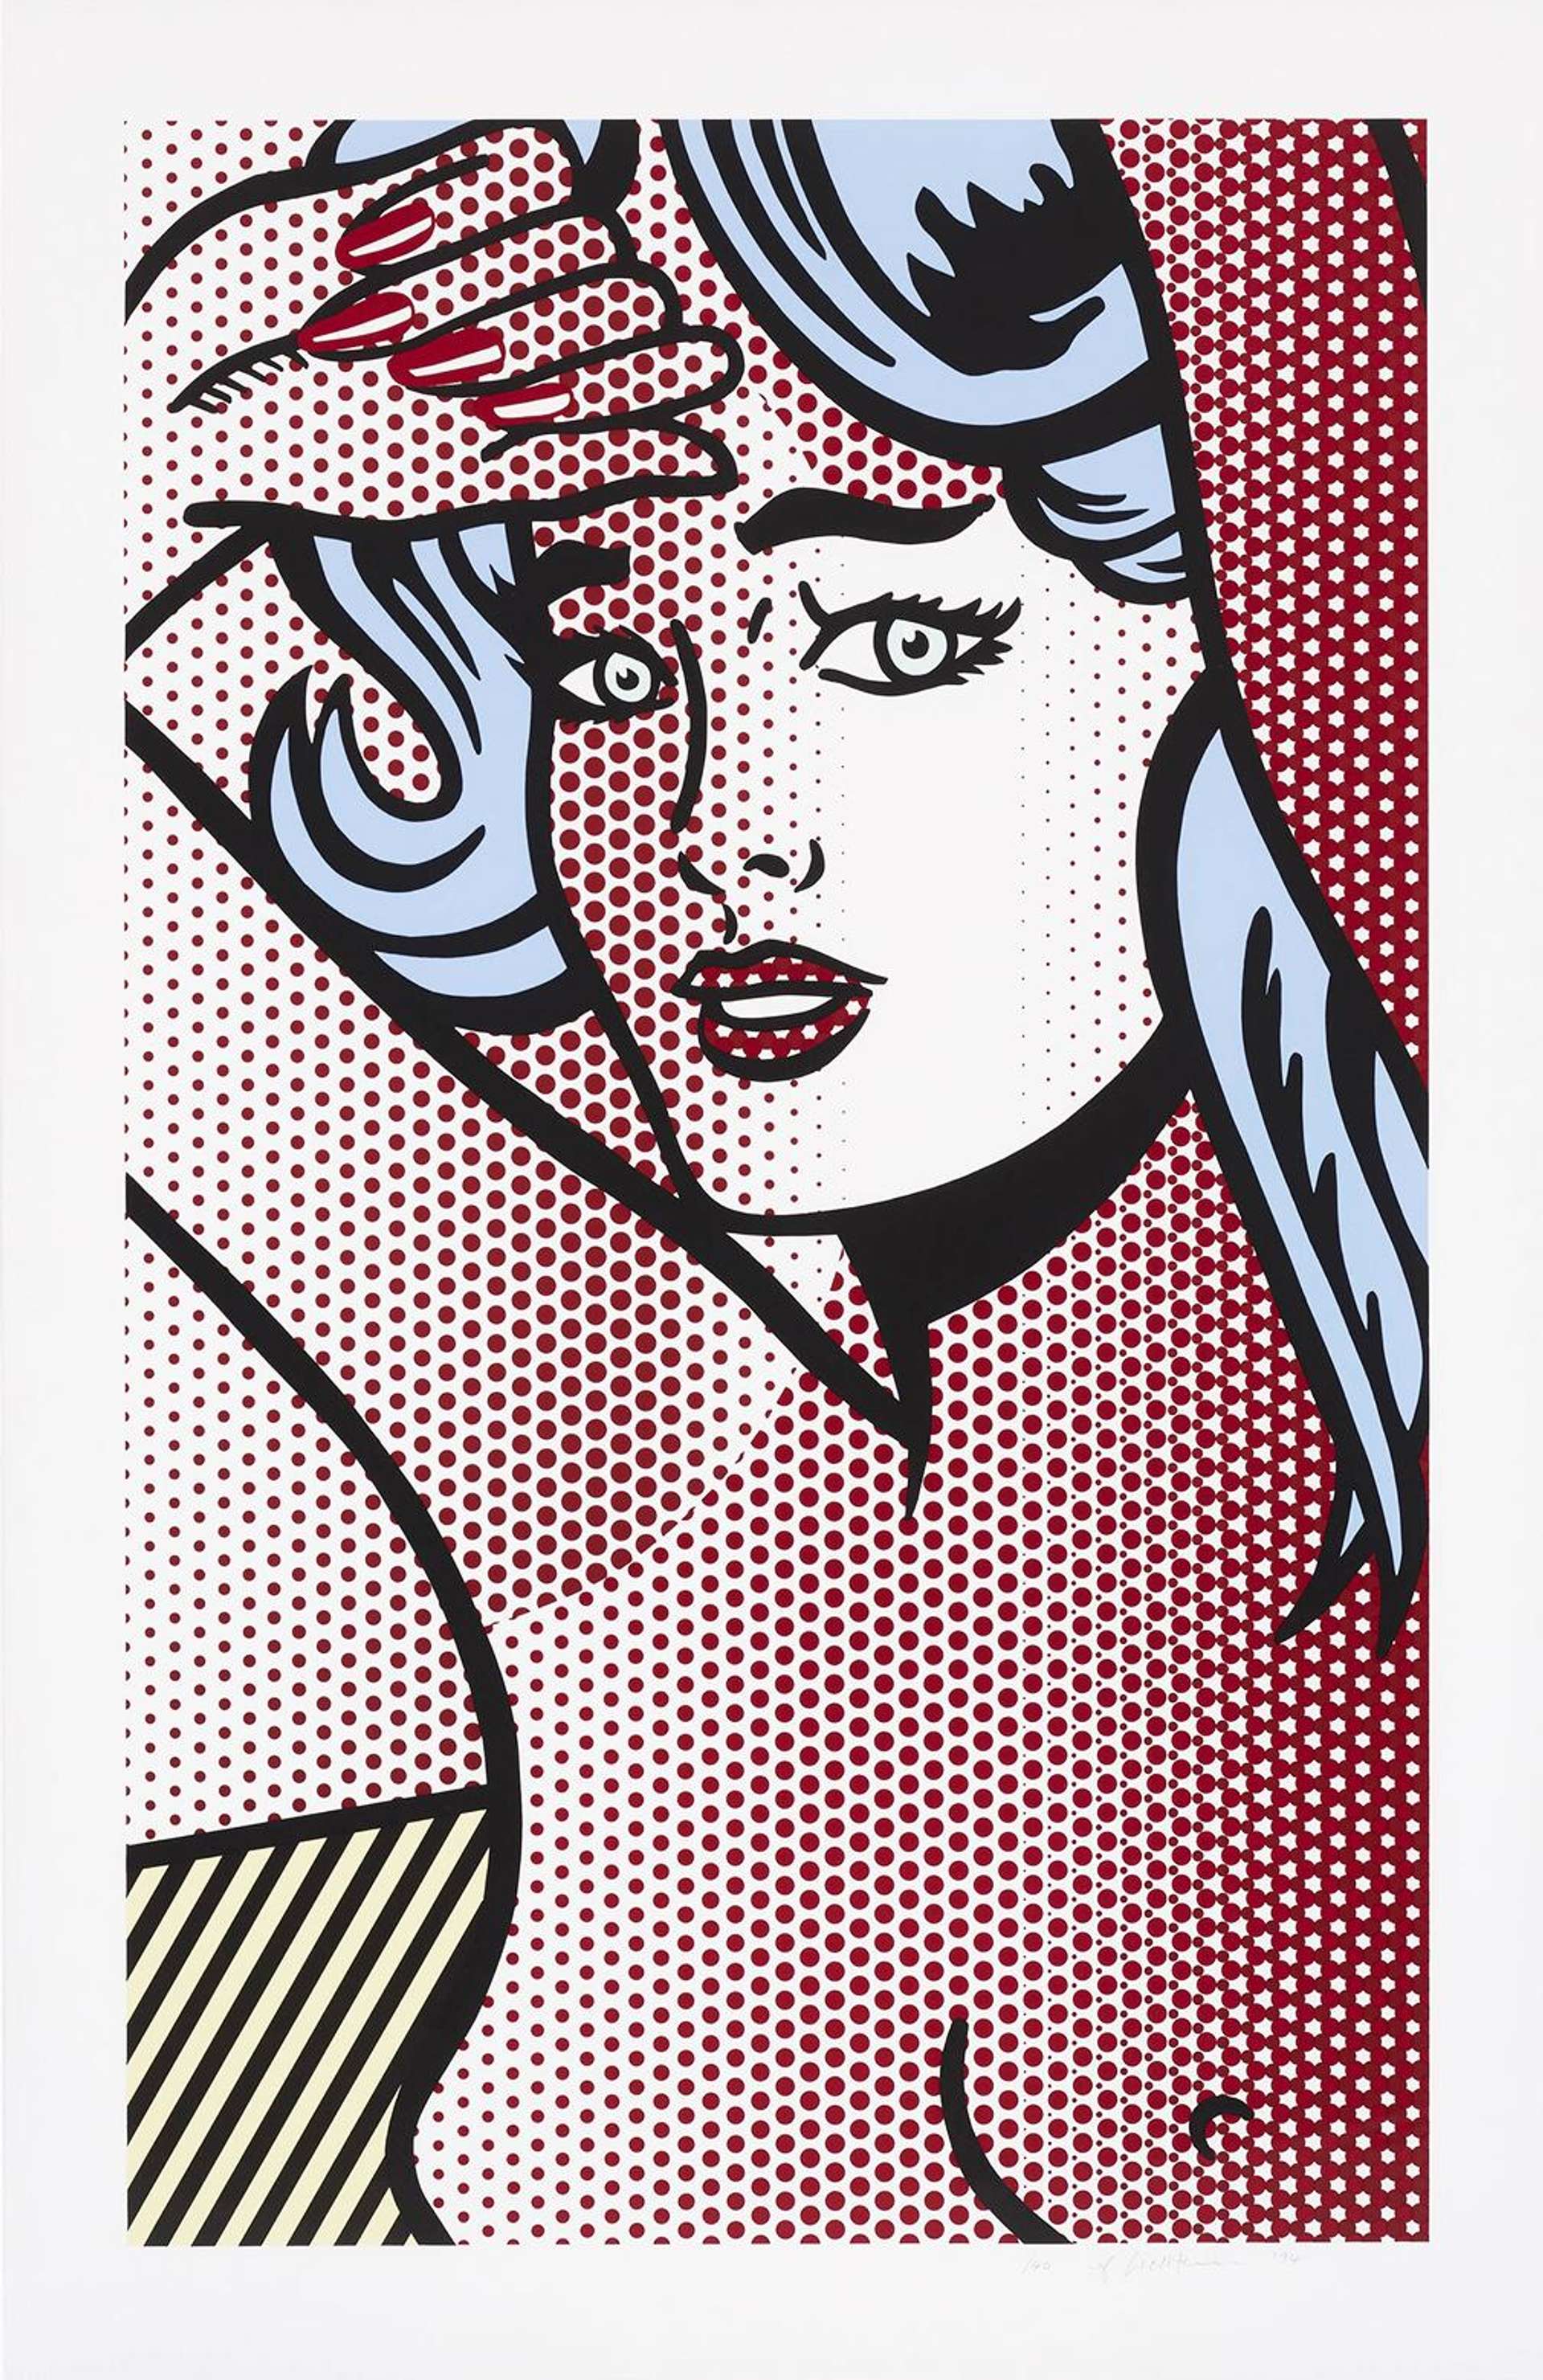 A screenprint by Roy Lichtenstein depicting a nude woman with blue hair, her hair delineated with red Ben-Day dots.